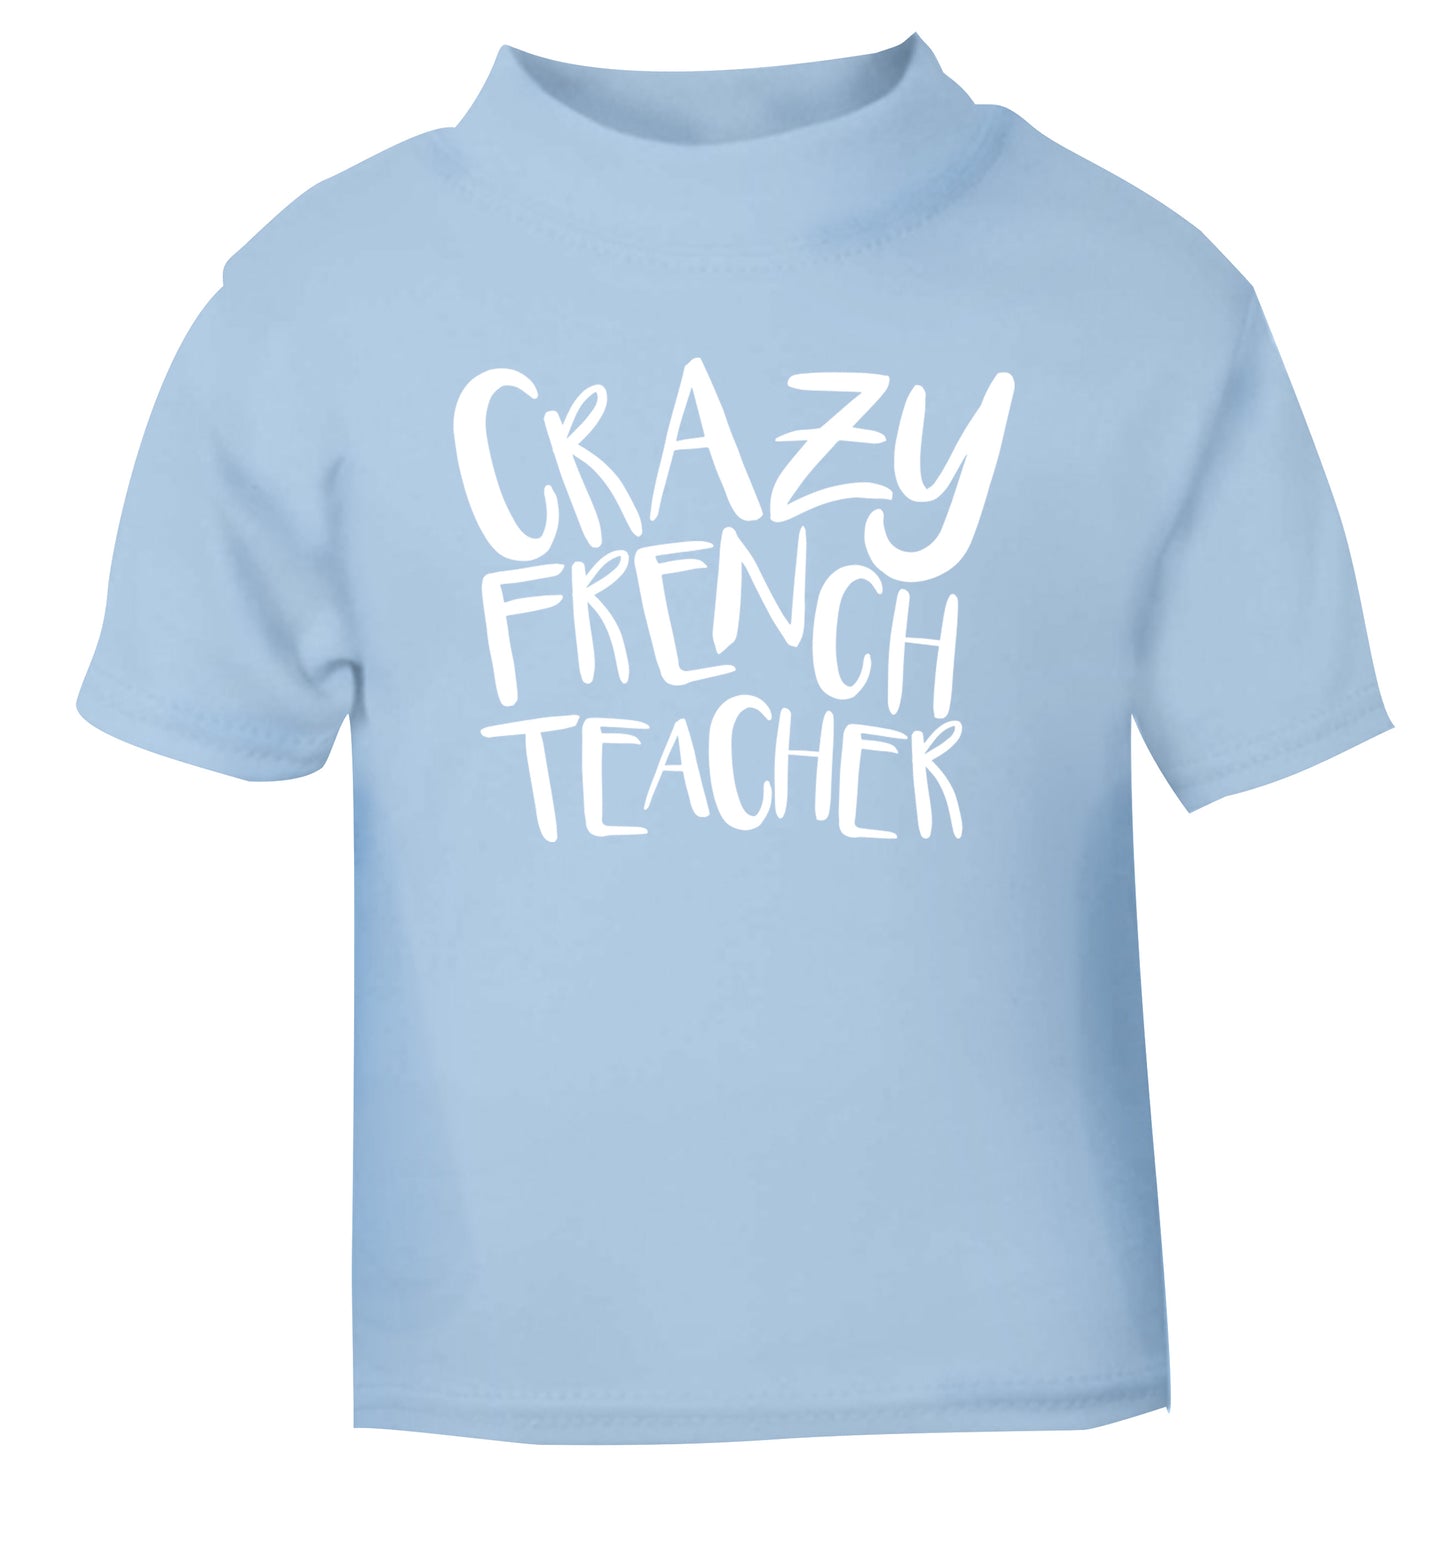 Crazy french teacher light blue Baby Toddler Tshirt 2 Years